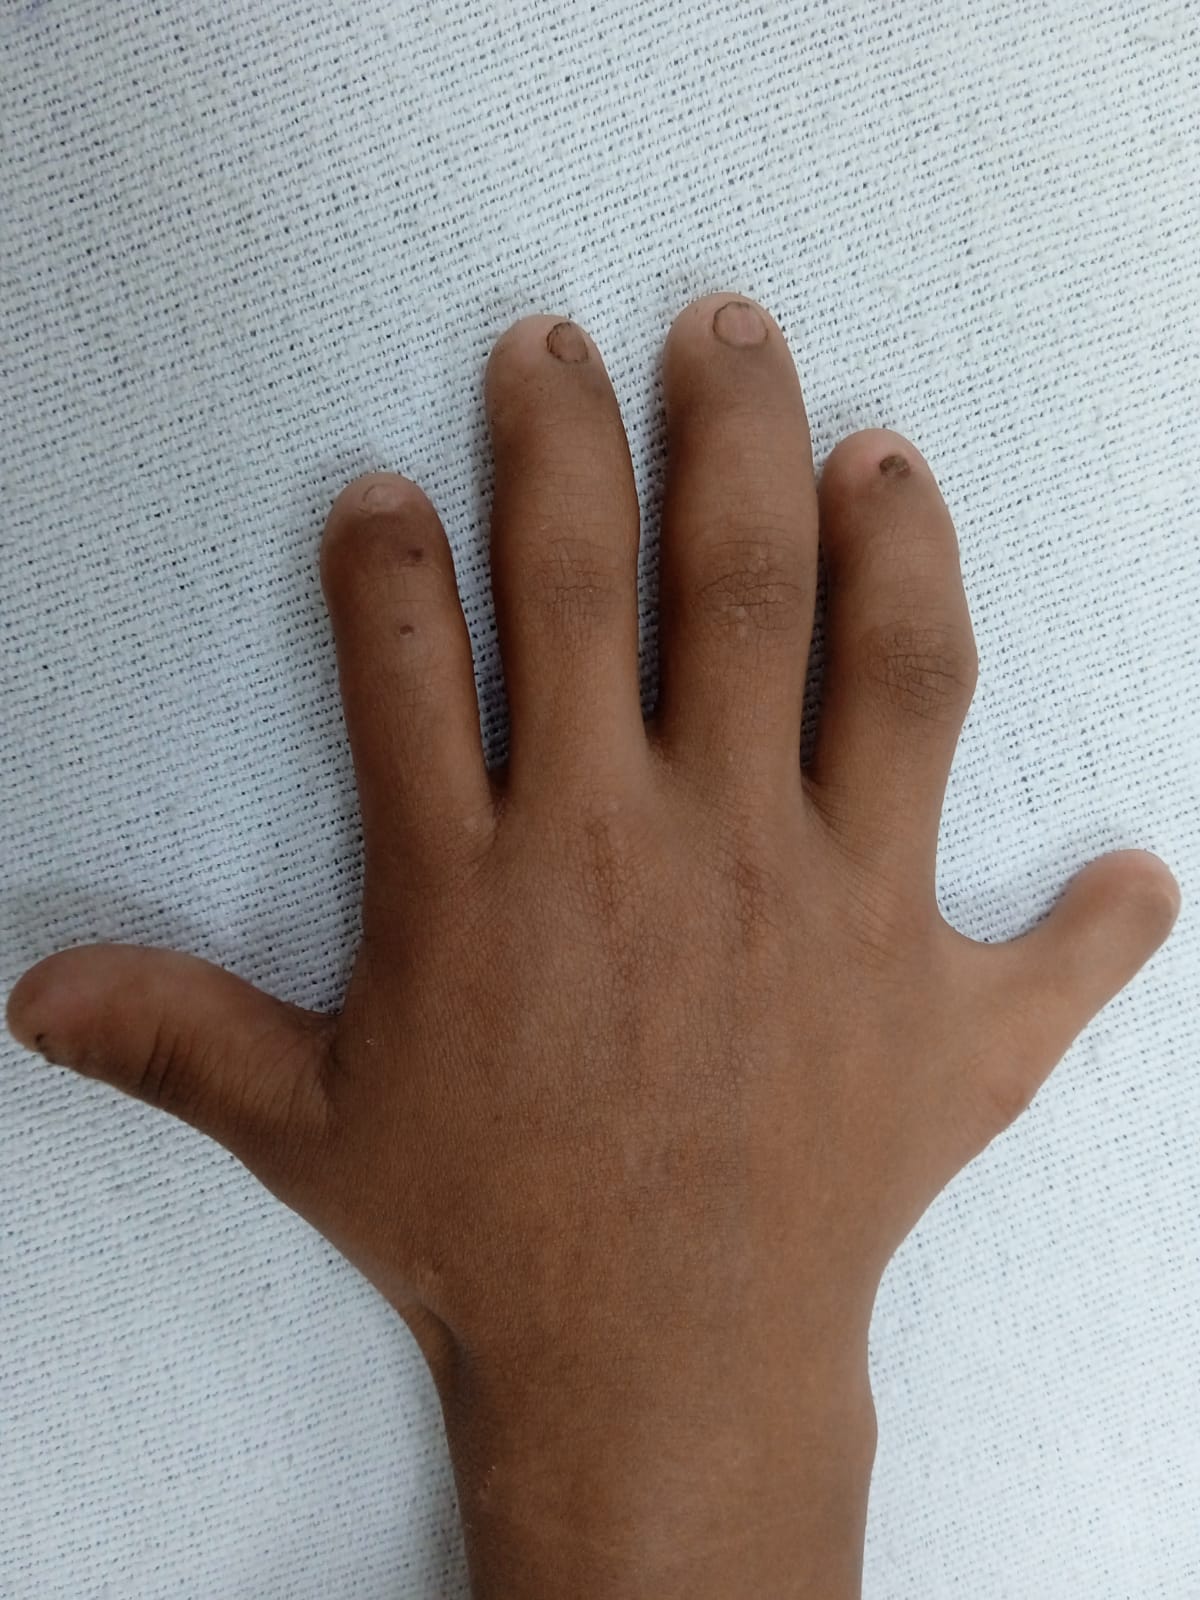 Postaxial polydactyly